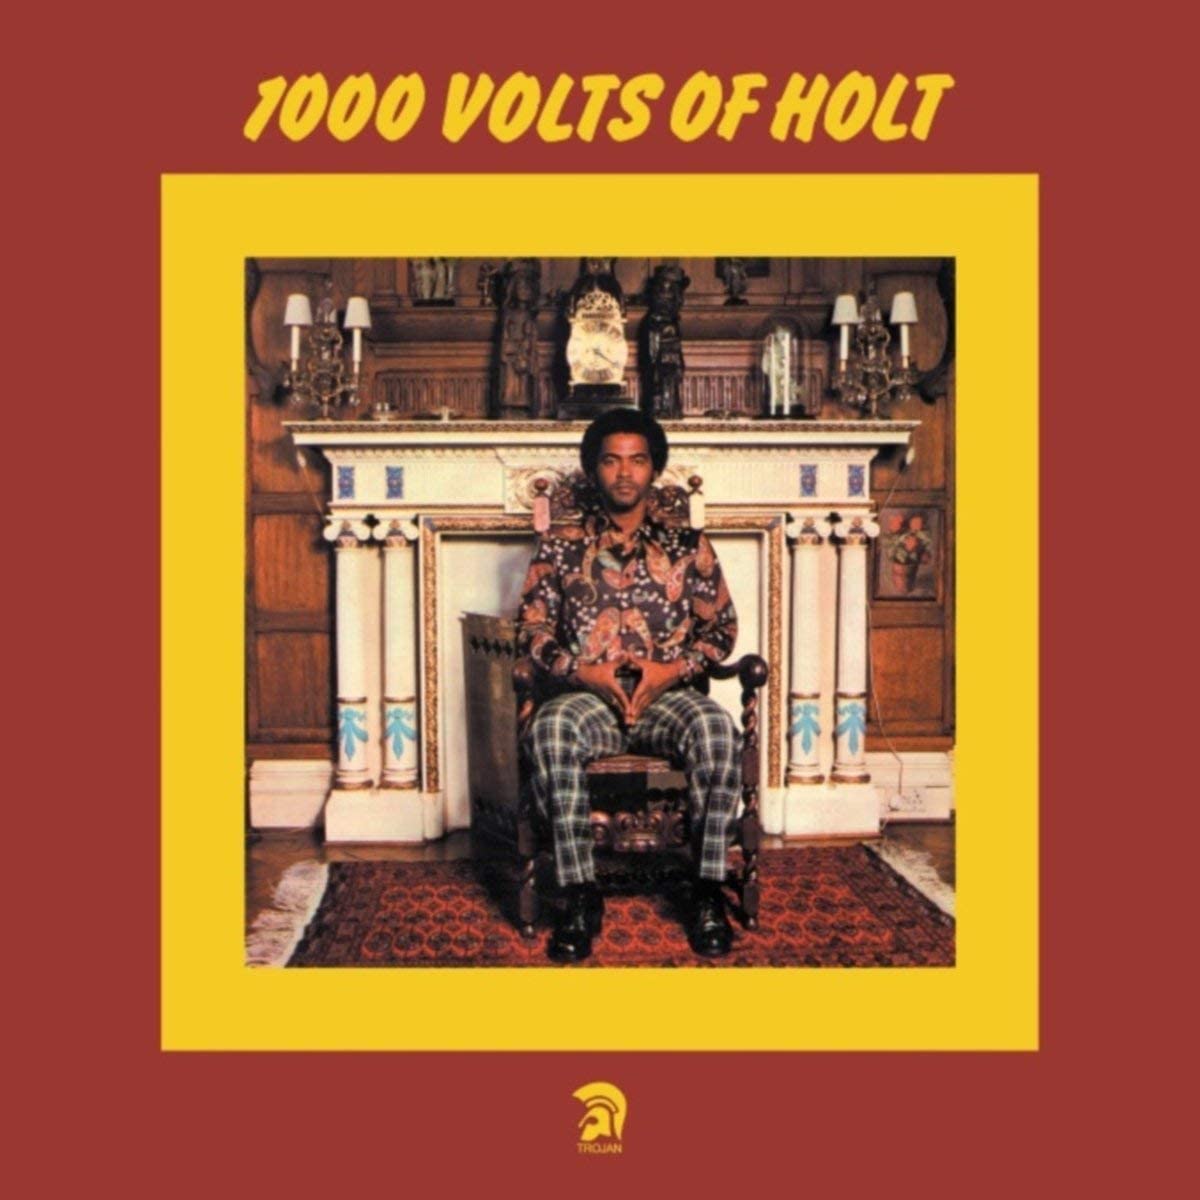 This album, originally released on Vinyl towards the end of 1973, and one of the best selling reggae albums of all time. Without doubt, Holt was one of the finest singers to emerge from Jamaica